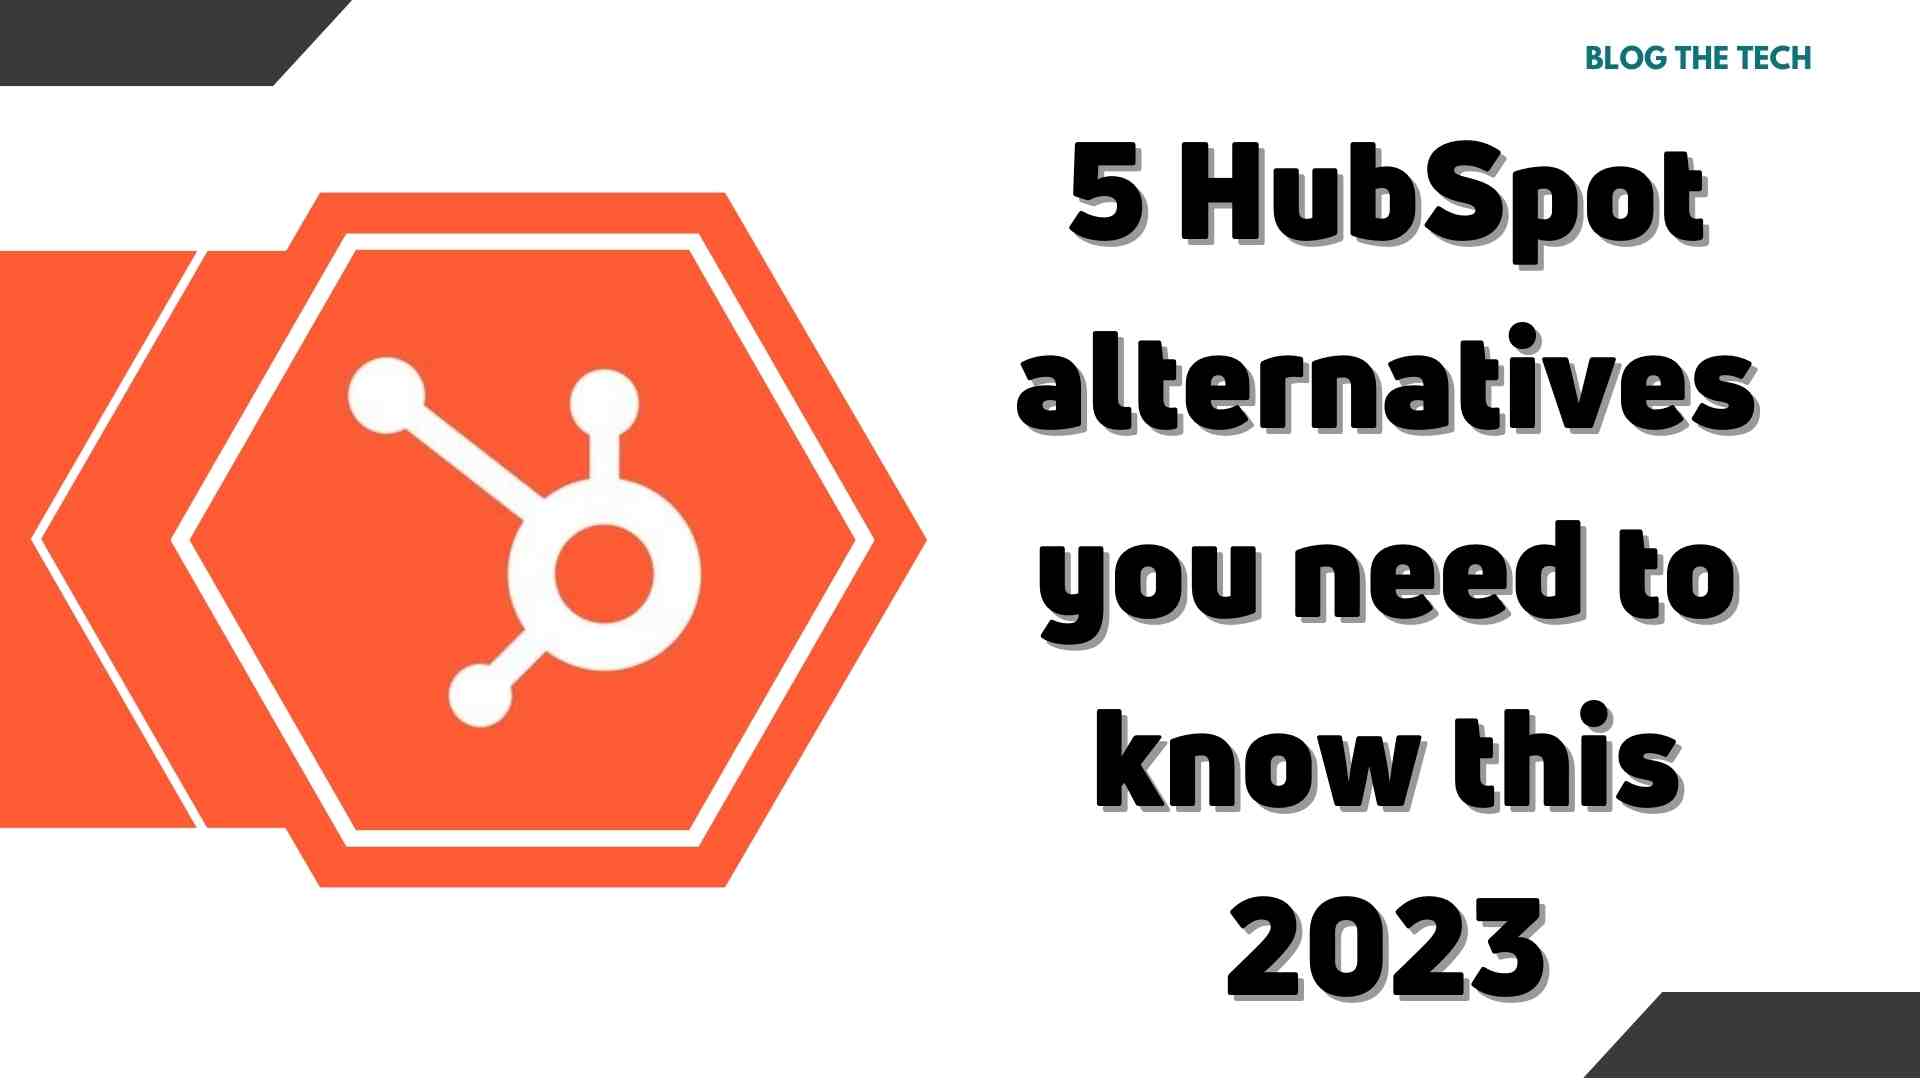 5 HubSpot alternatives you need to know this 2023